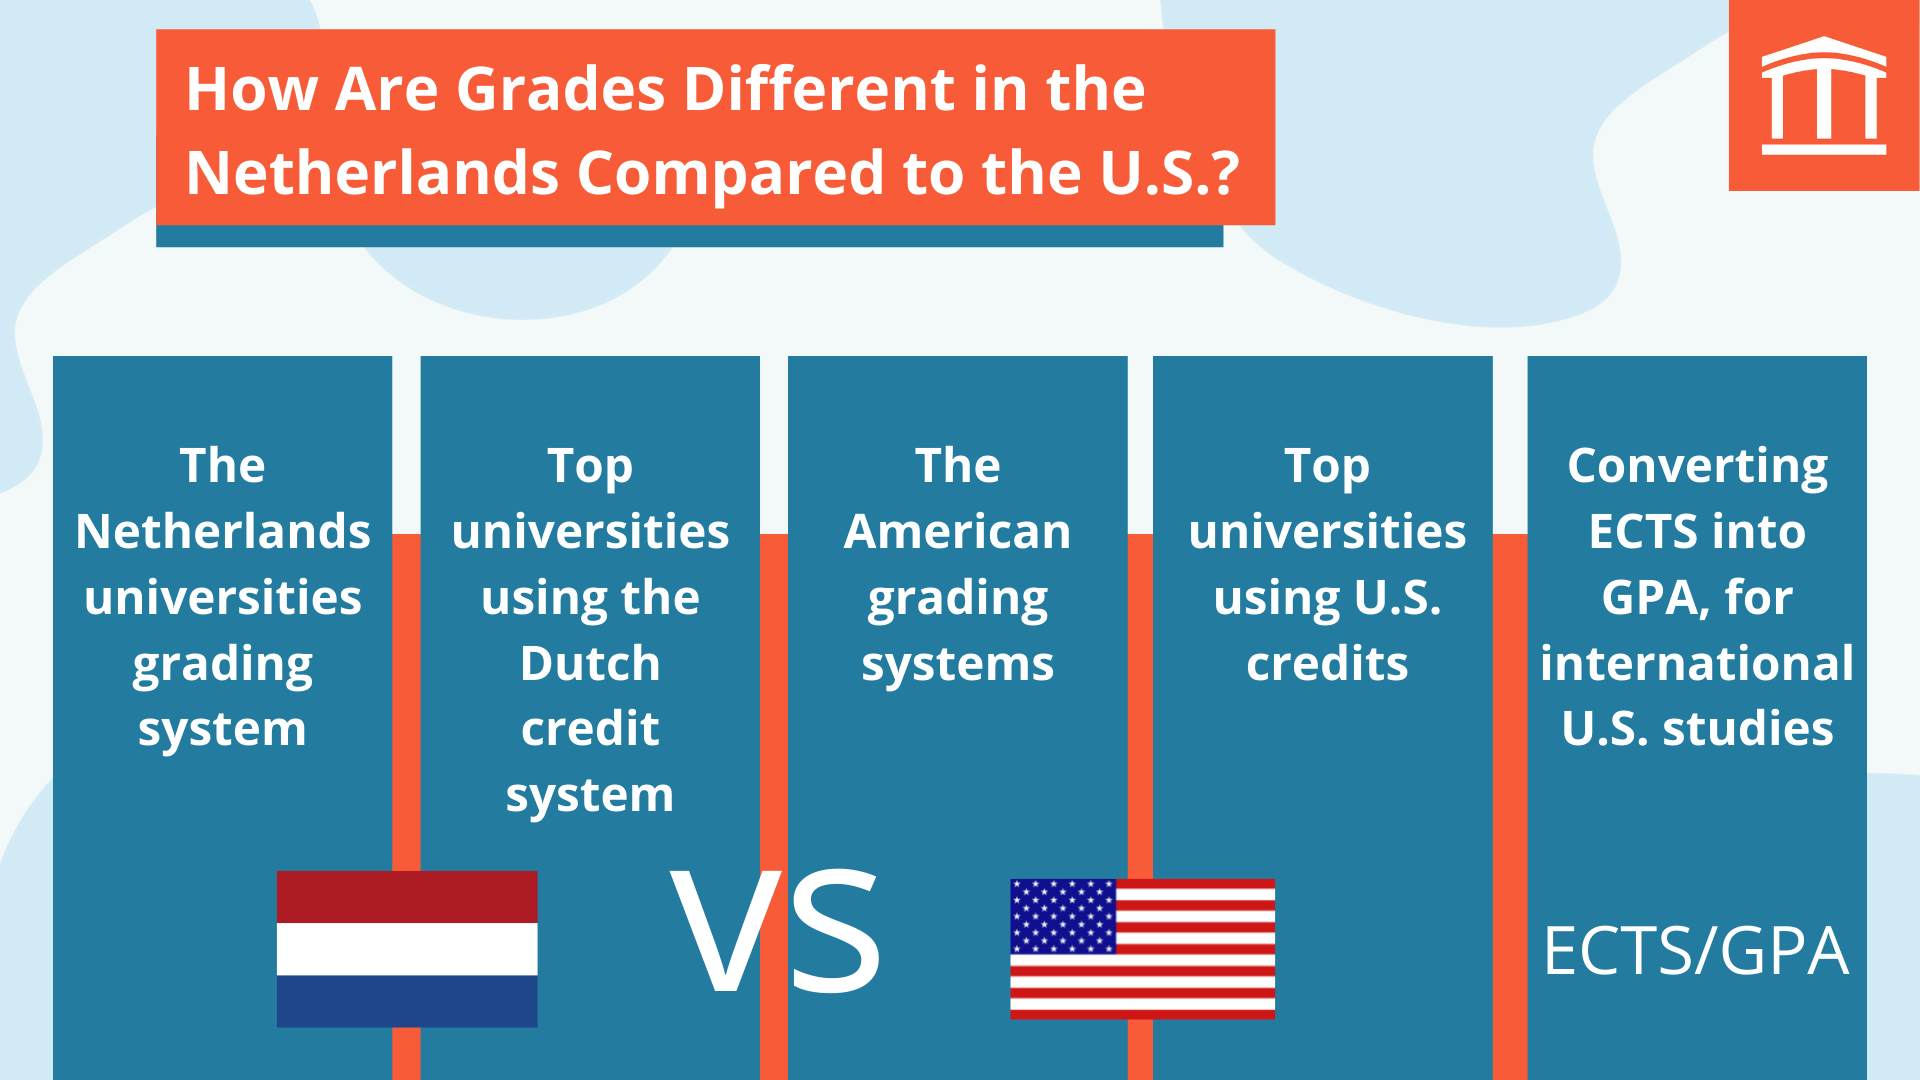 How Are Grades Different the Netherlands Compared to the U.S.? - BachelorsPortal.com